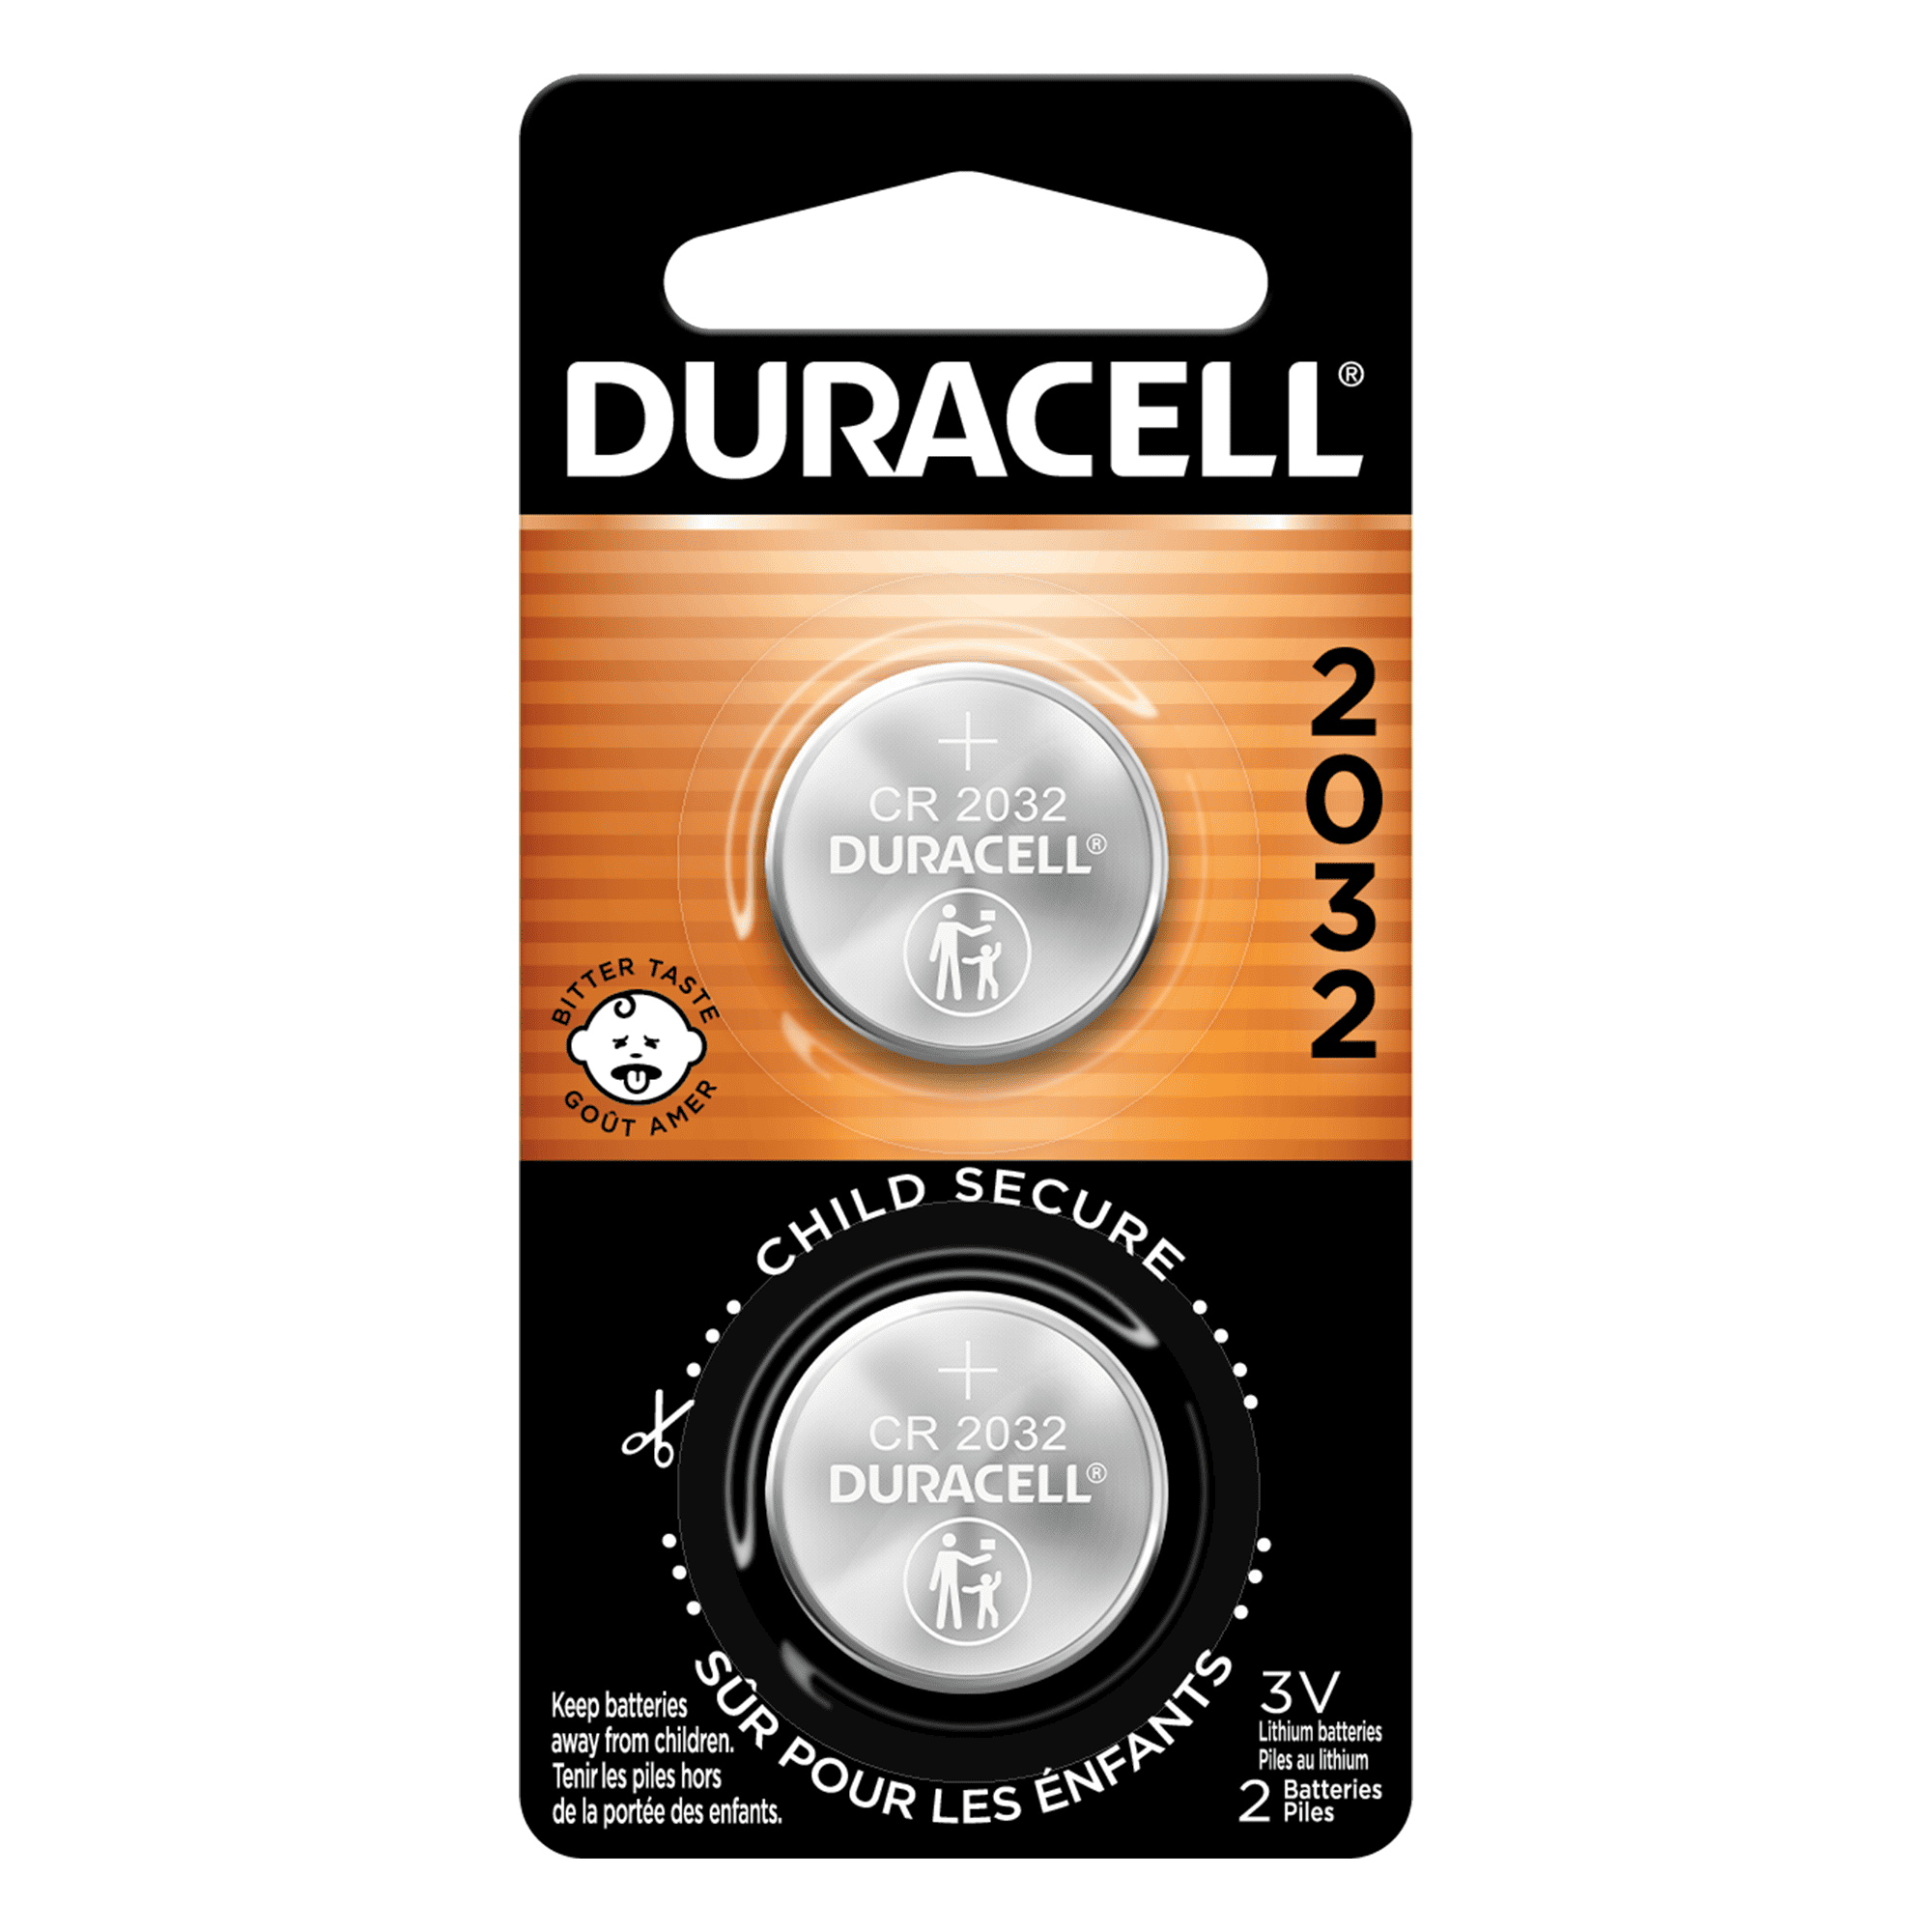 Duracell CR2032 3V Lithium Coin Battery with Child Safety Features,  Compatible with Apple AirTag, Key Fob, Car Remote, Glucose Monitor, and  other